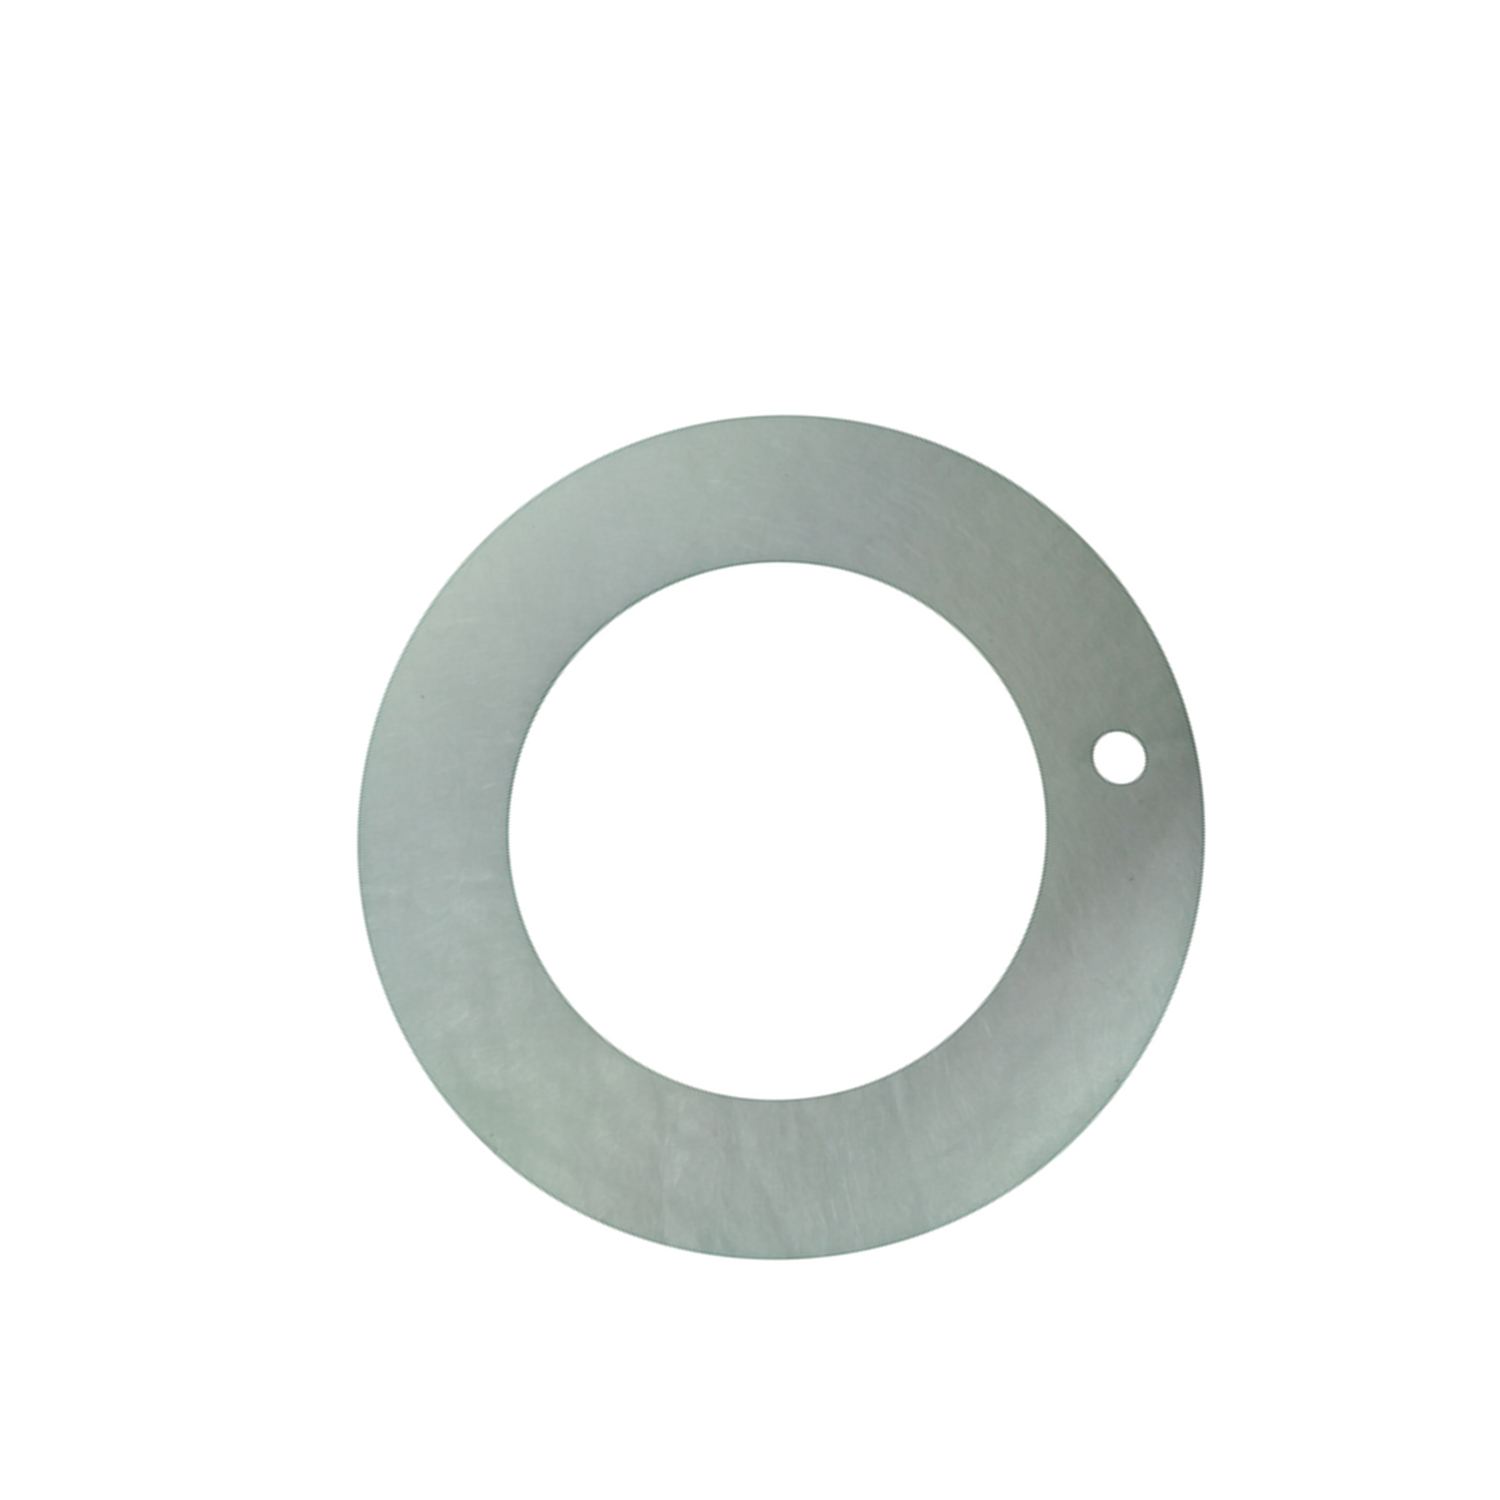 Smoke Stack Gasket for Pit Boss Pellet Grill-YAOAWE